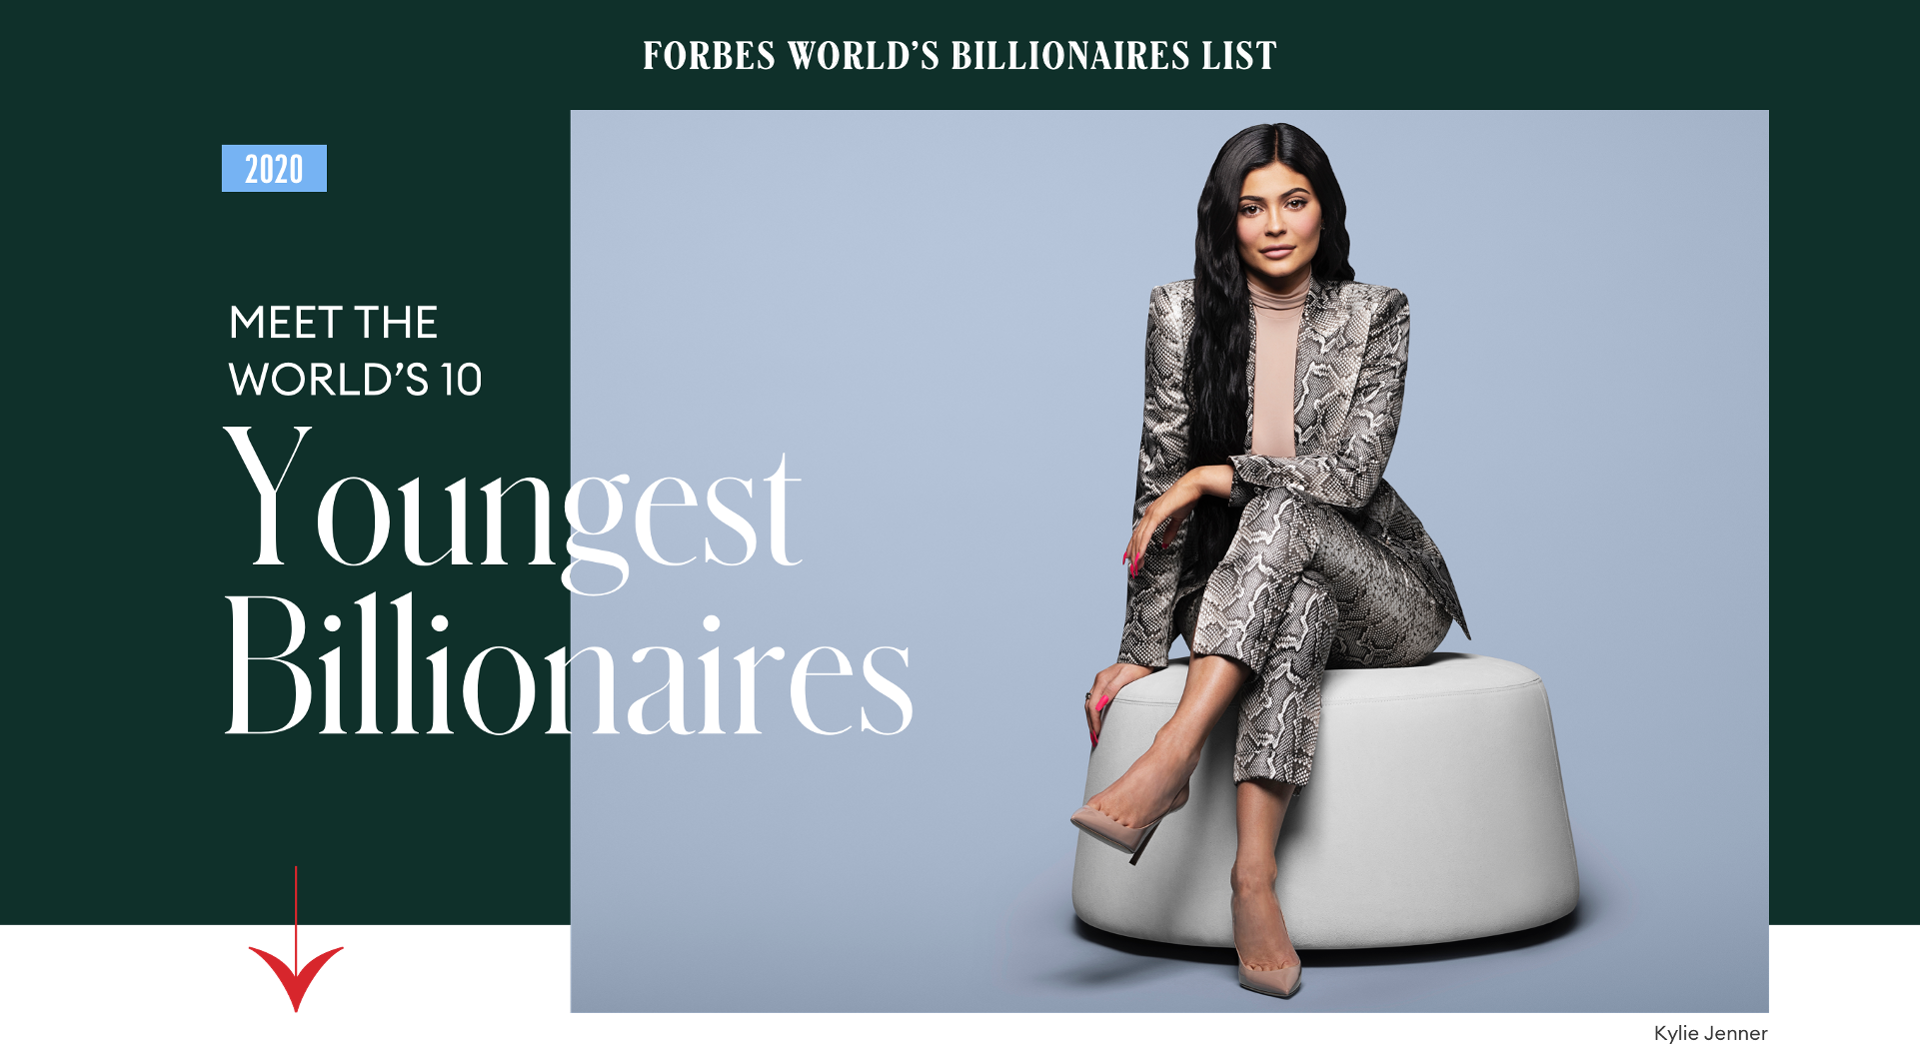 Forbes World's youngest billionaires